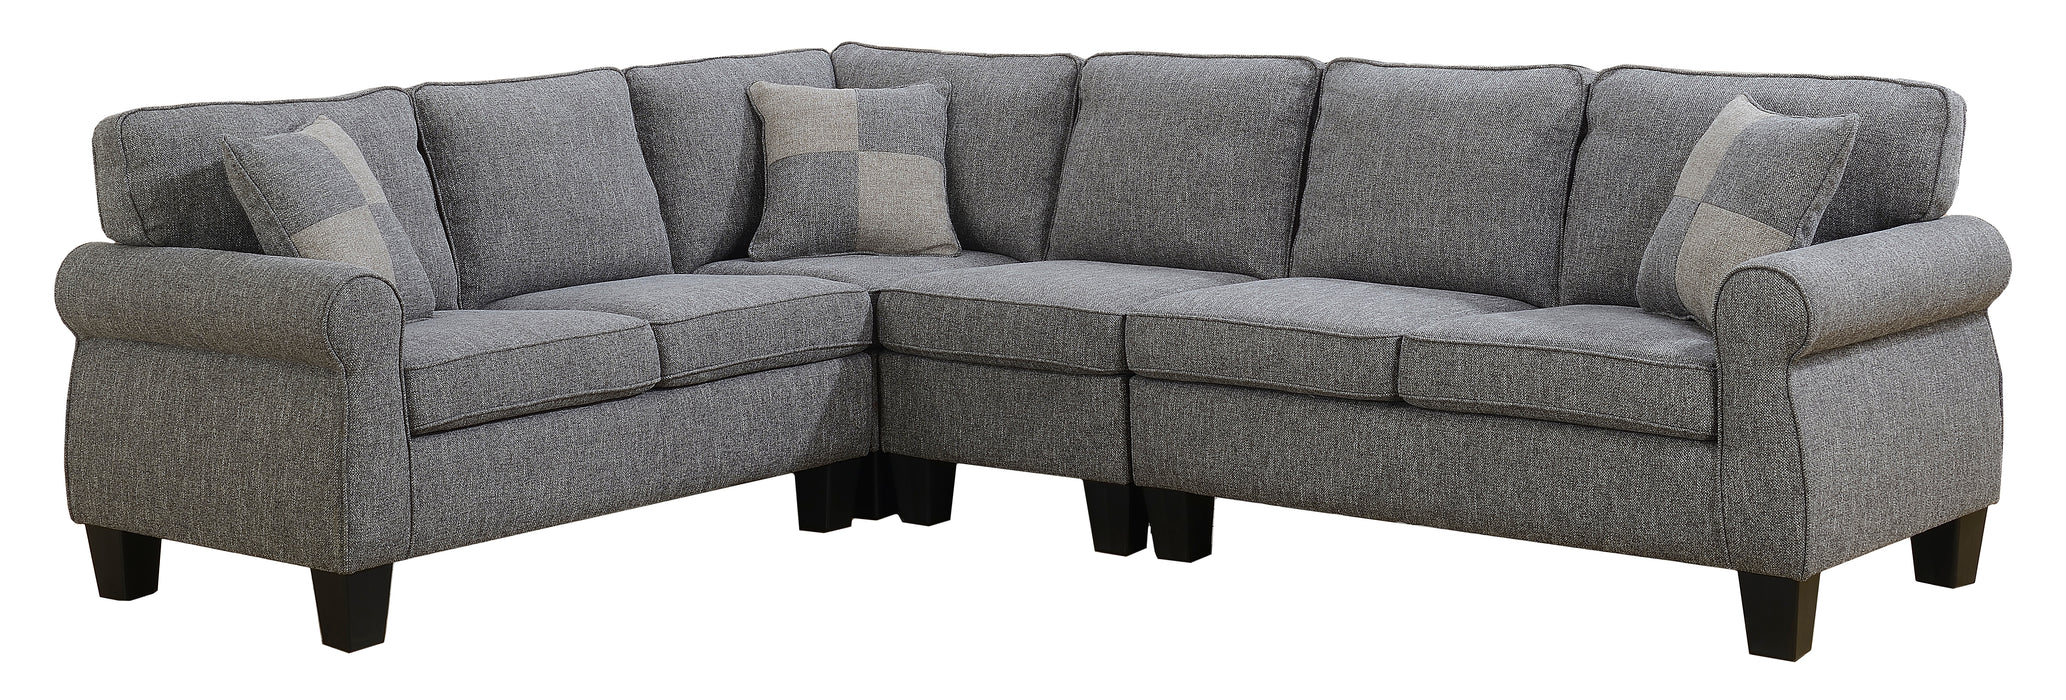 Victoria Sectional with Armless Chair - Grey - Decor Furniture & Mattress